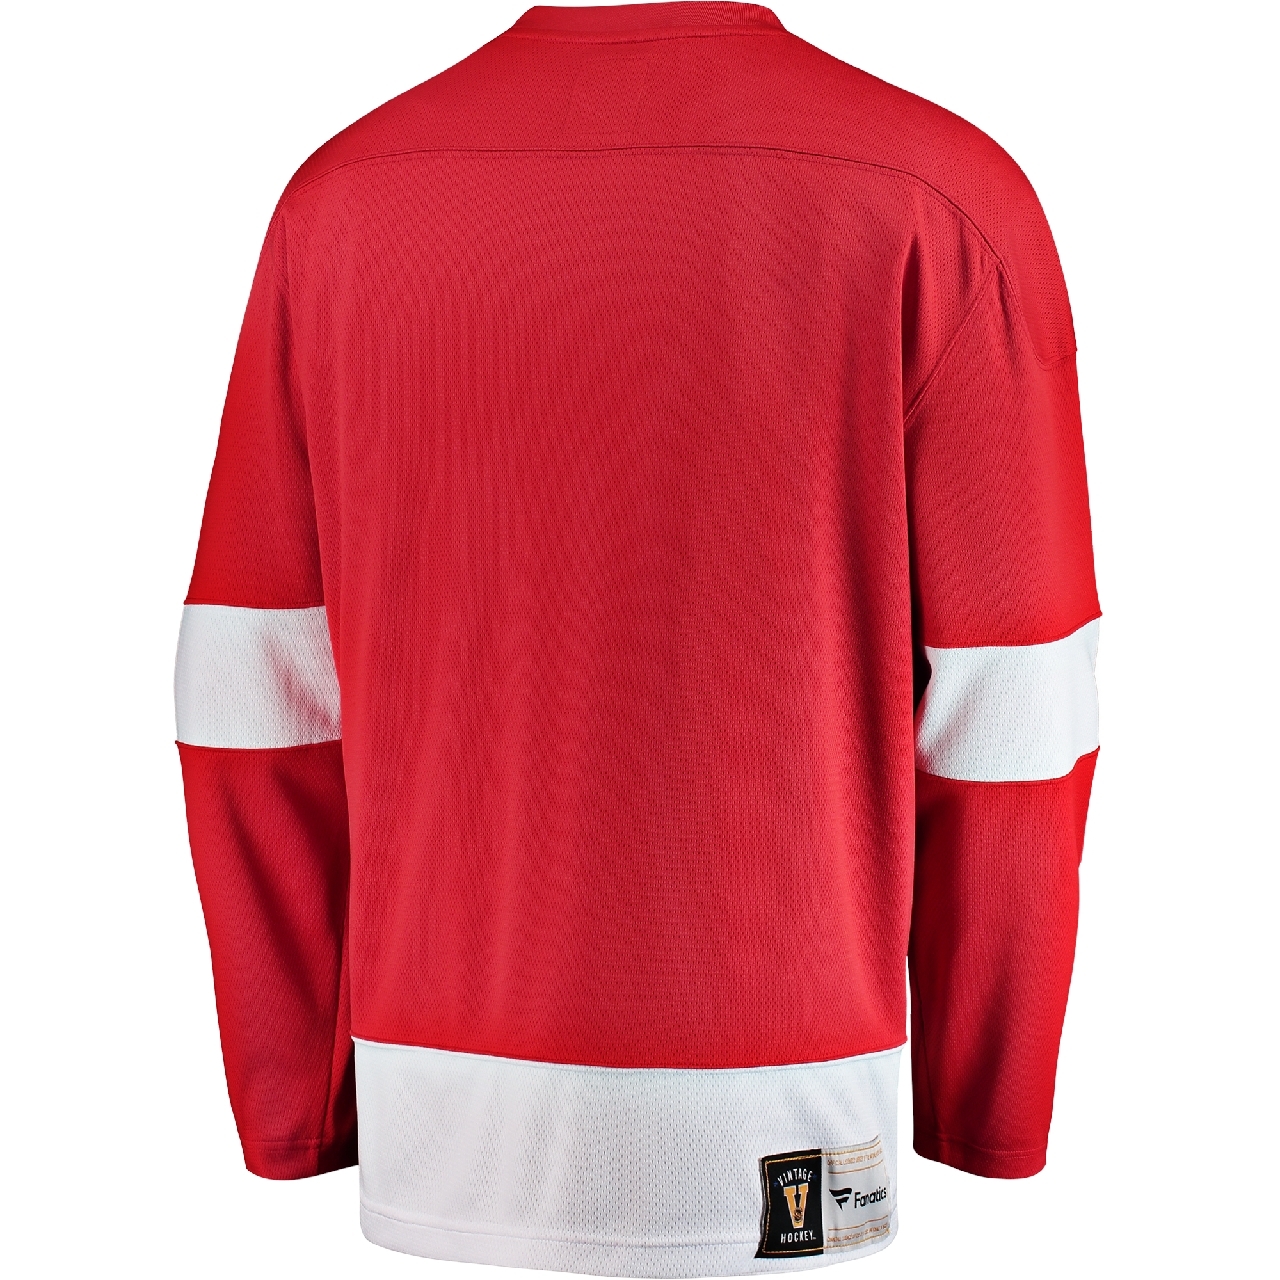 Majestic Athletic Detroit Red Wings Replica Jersey Red